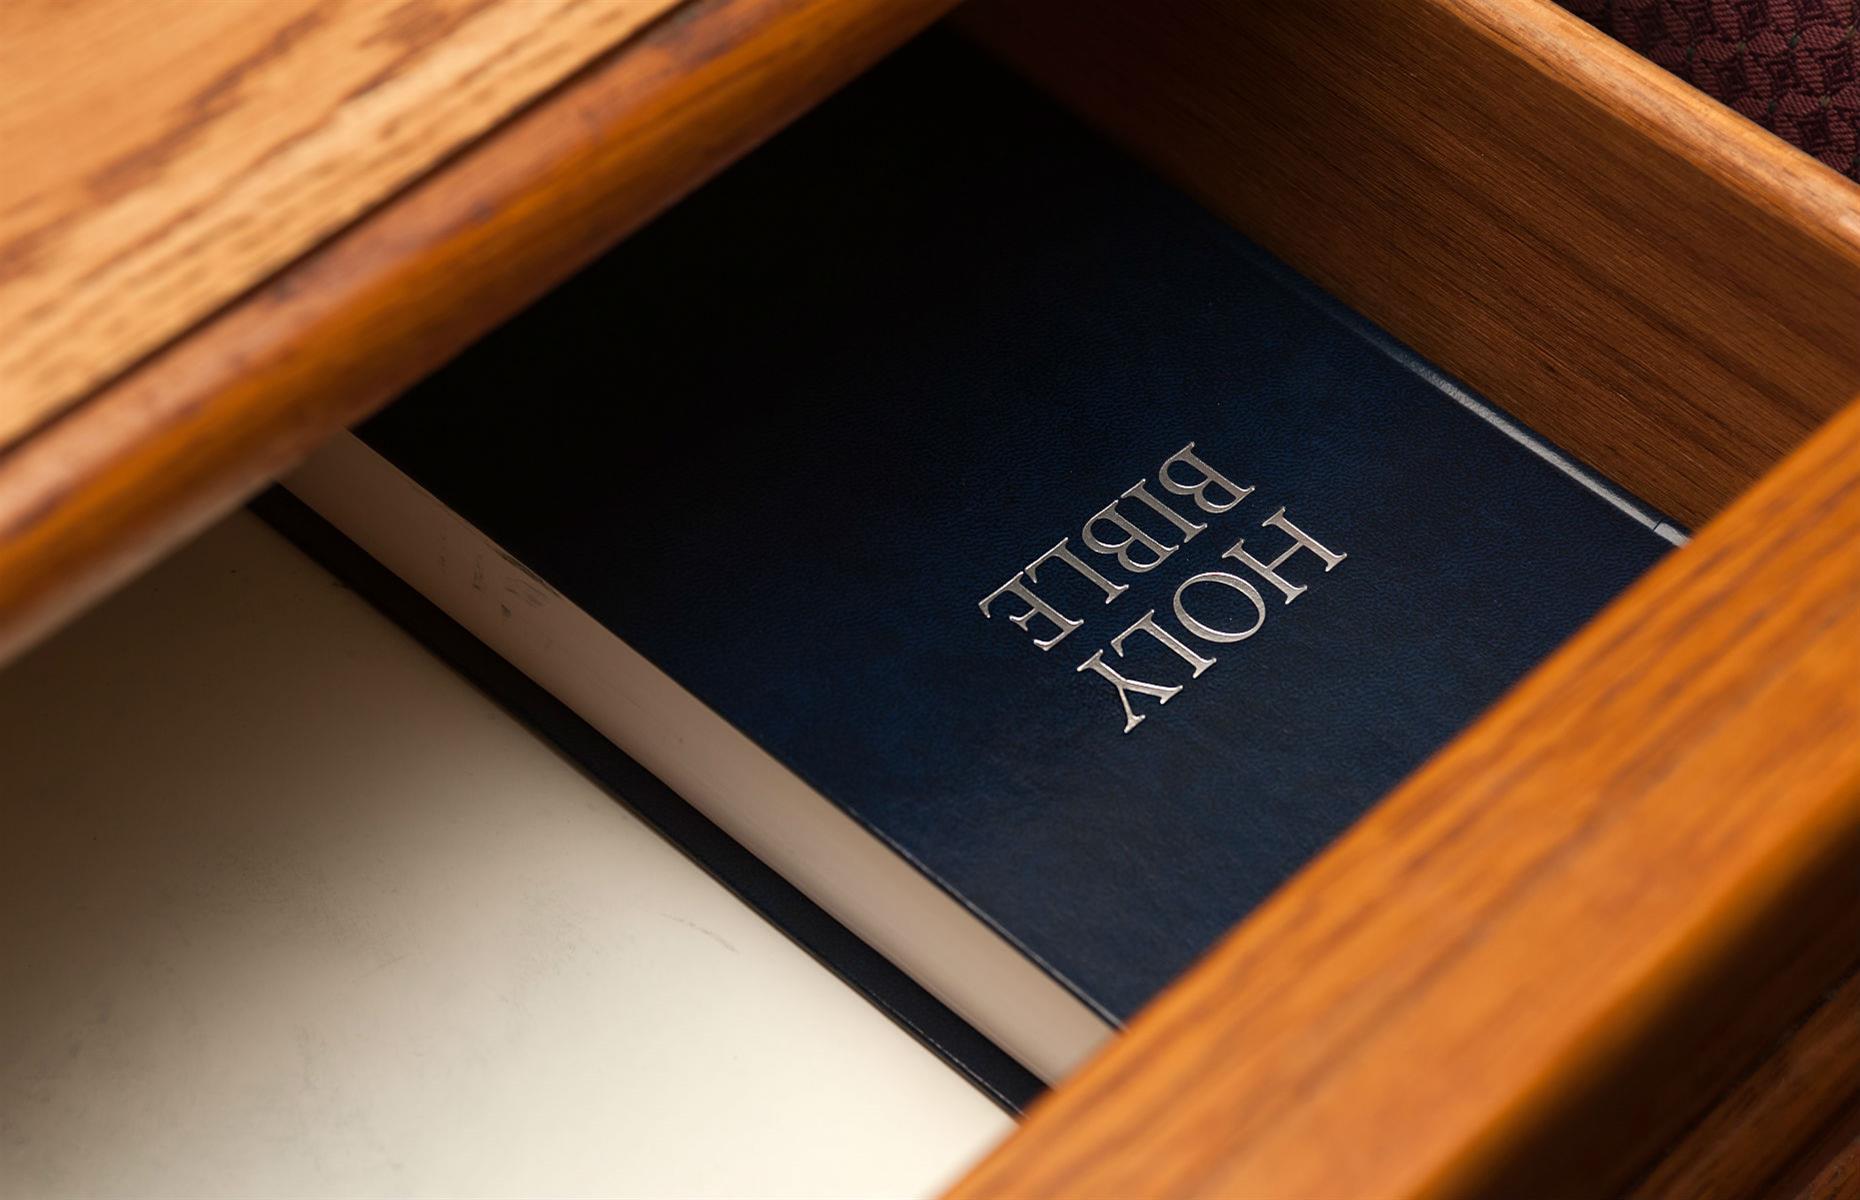 <p>The Bible you find in your bedside dresser has most likely been provided by The Gideons International, a Christian organization that expects their donation to have a six-year life span. In fact, the organization estimates that a quarter of travelers thumb through the Bible in their hotel room, so leave yours behind for the next guest. </p>  <p><strong><a href="https://www.loveexploring.com/galleries/137486/the-coolest-features-onboard-cruise-ships?page=1">Now discover the coolest features on board cruise ships</a></strong></p>